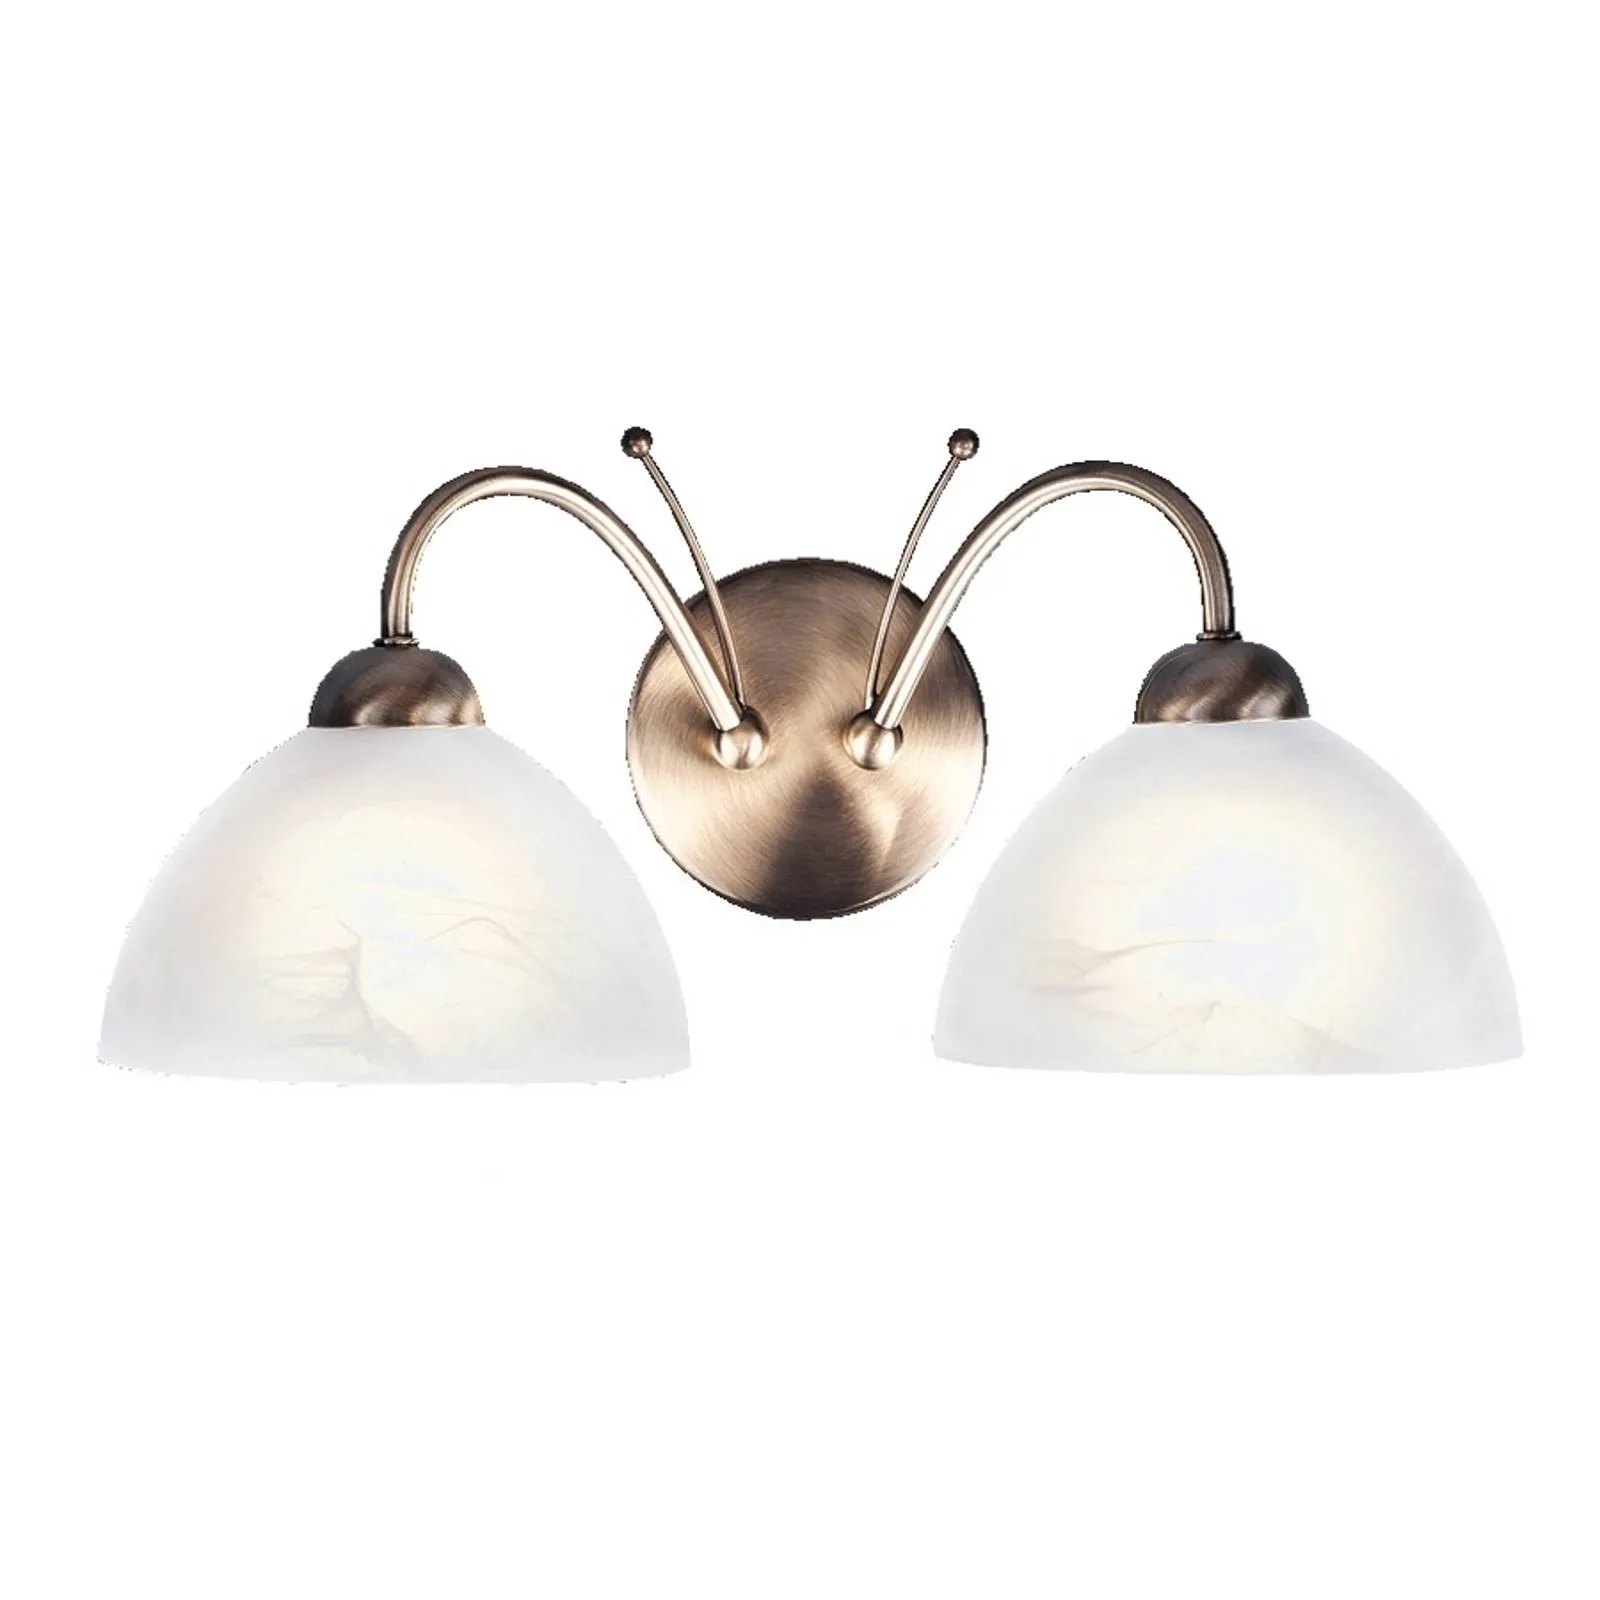 Milanese wall light, two-bulb, antique brass